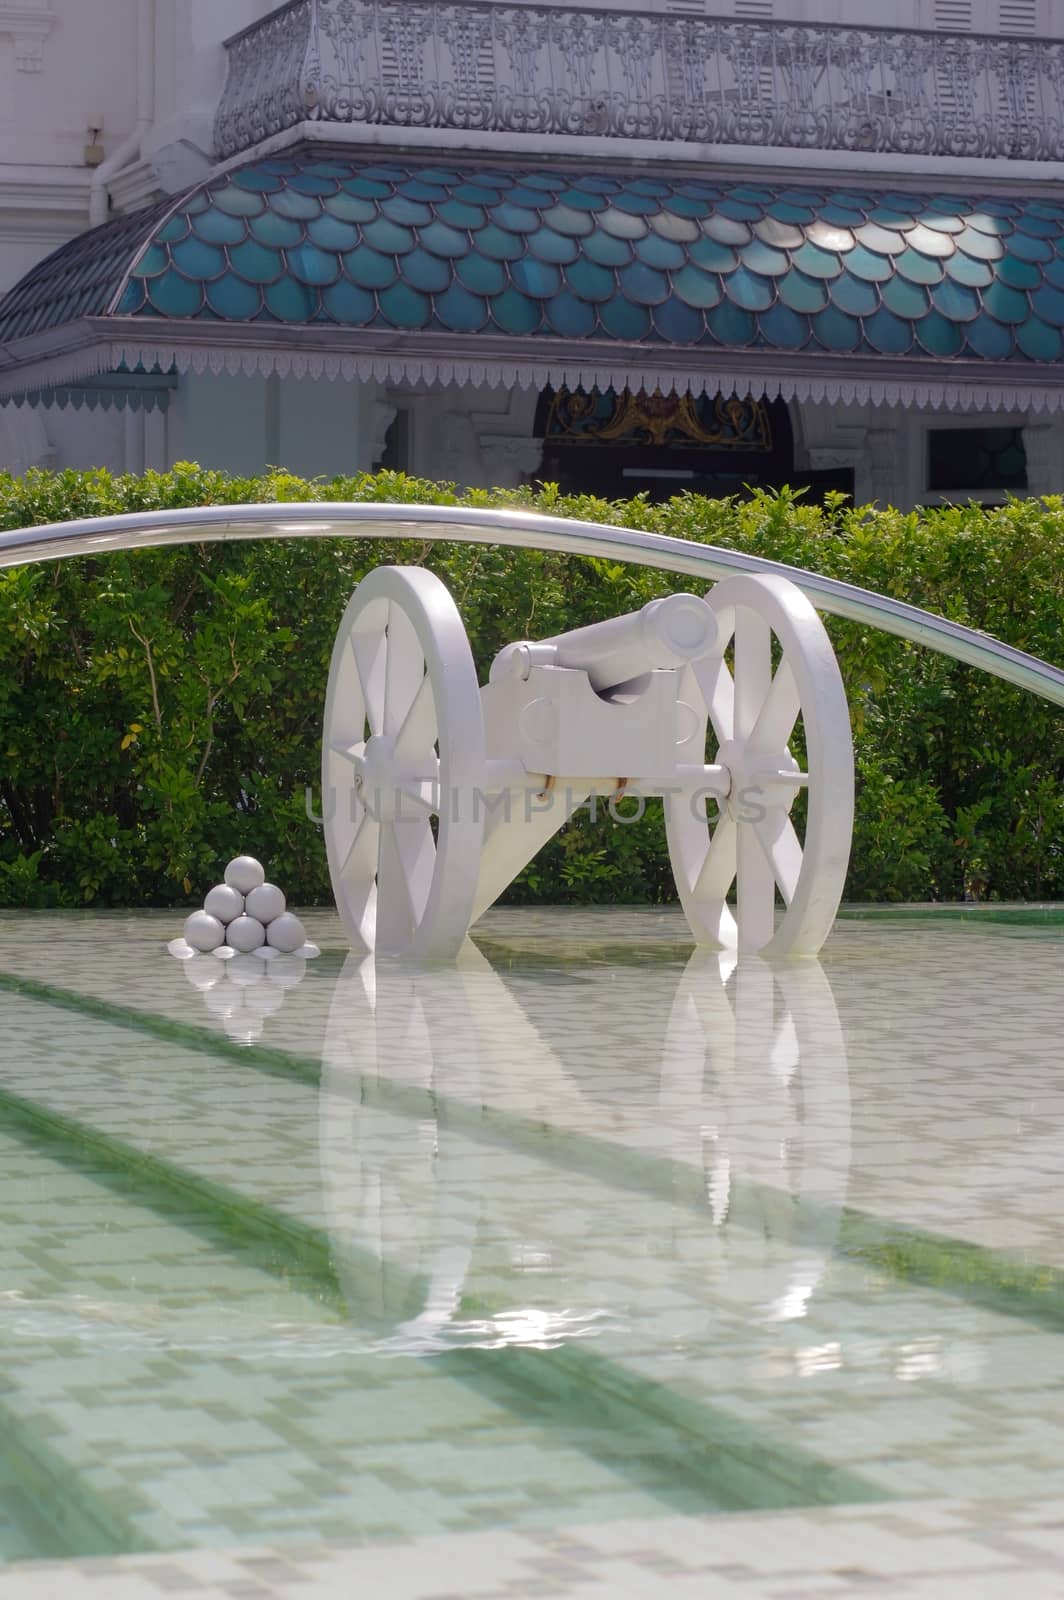 Georgtown, Penang, Malaysia - APRIL 18, 2016: a symbolic white cannon by evolutionnow